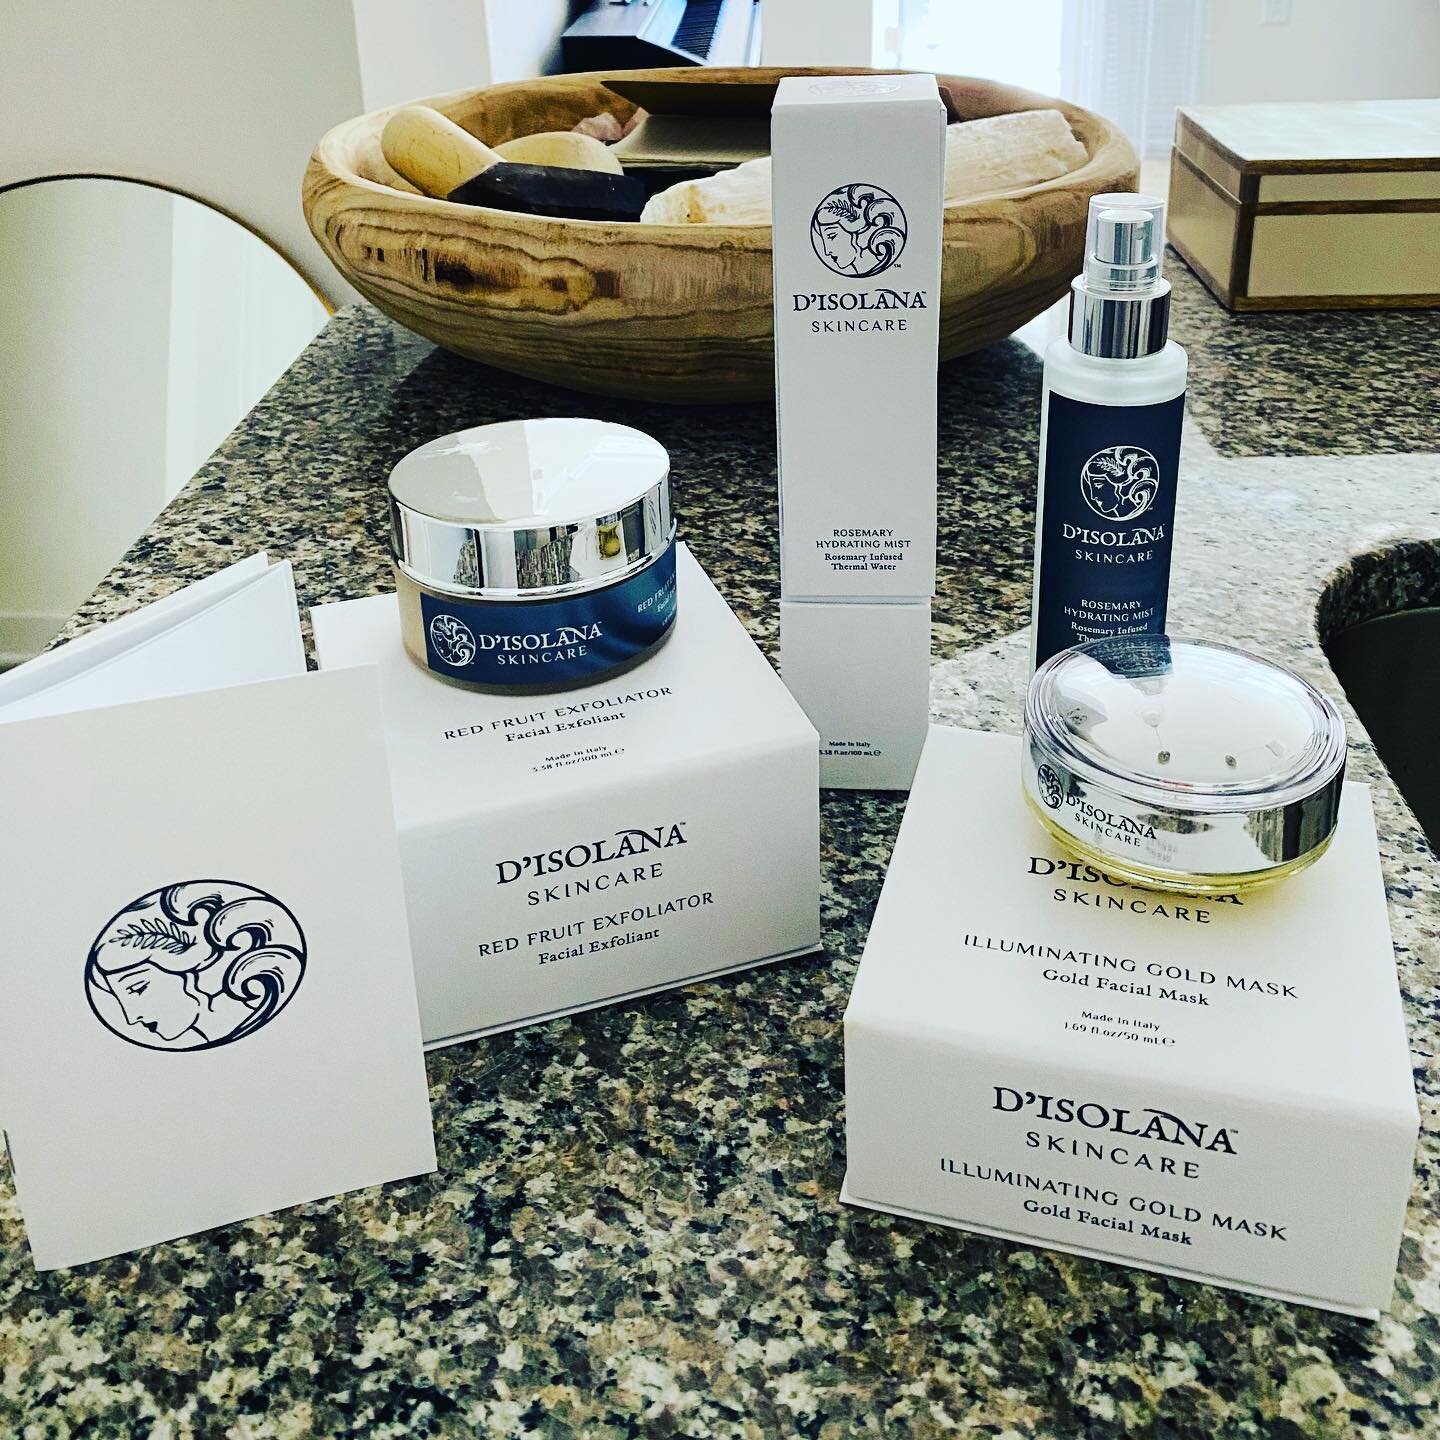 My sweet and talented friend Jen Esposito @disolanaskincare has created a line of skin care that is beyond measure. She uses Thermal Water procured from Southern Italy to form the foundation of each product.  The effectiveness of her Gold Mask is nex